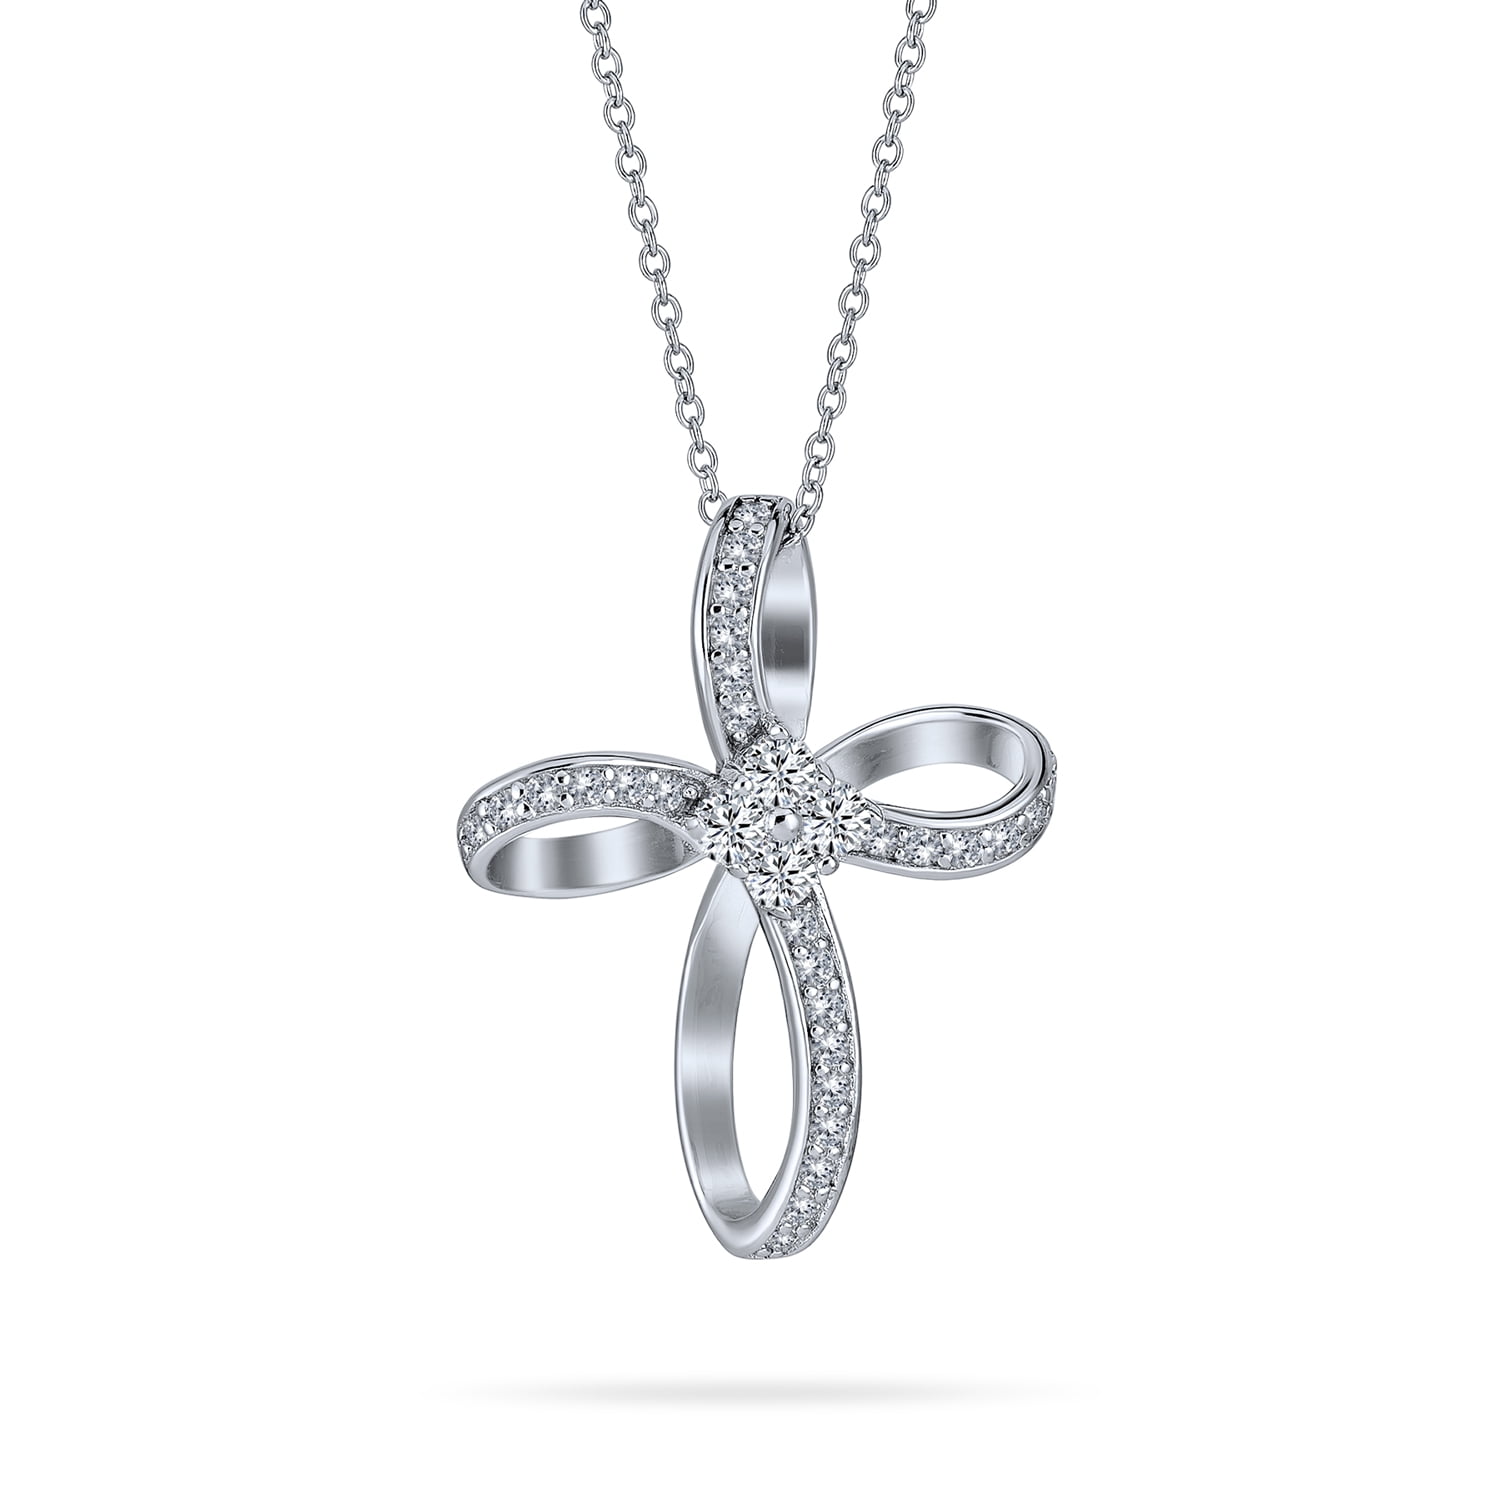 2015 New Silver Plated Cross Infinity Pendant Chain Necklace Fashion Jewelry BH